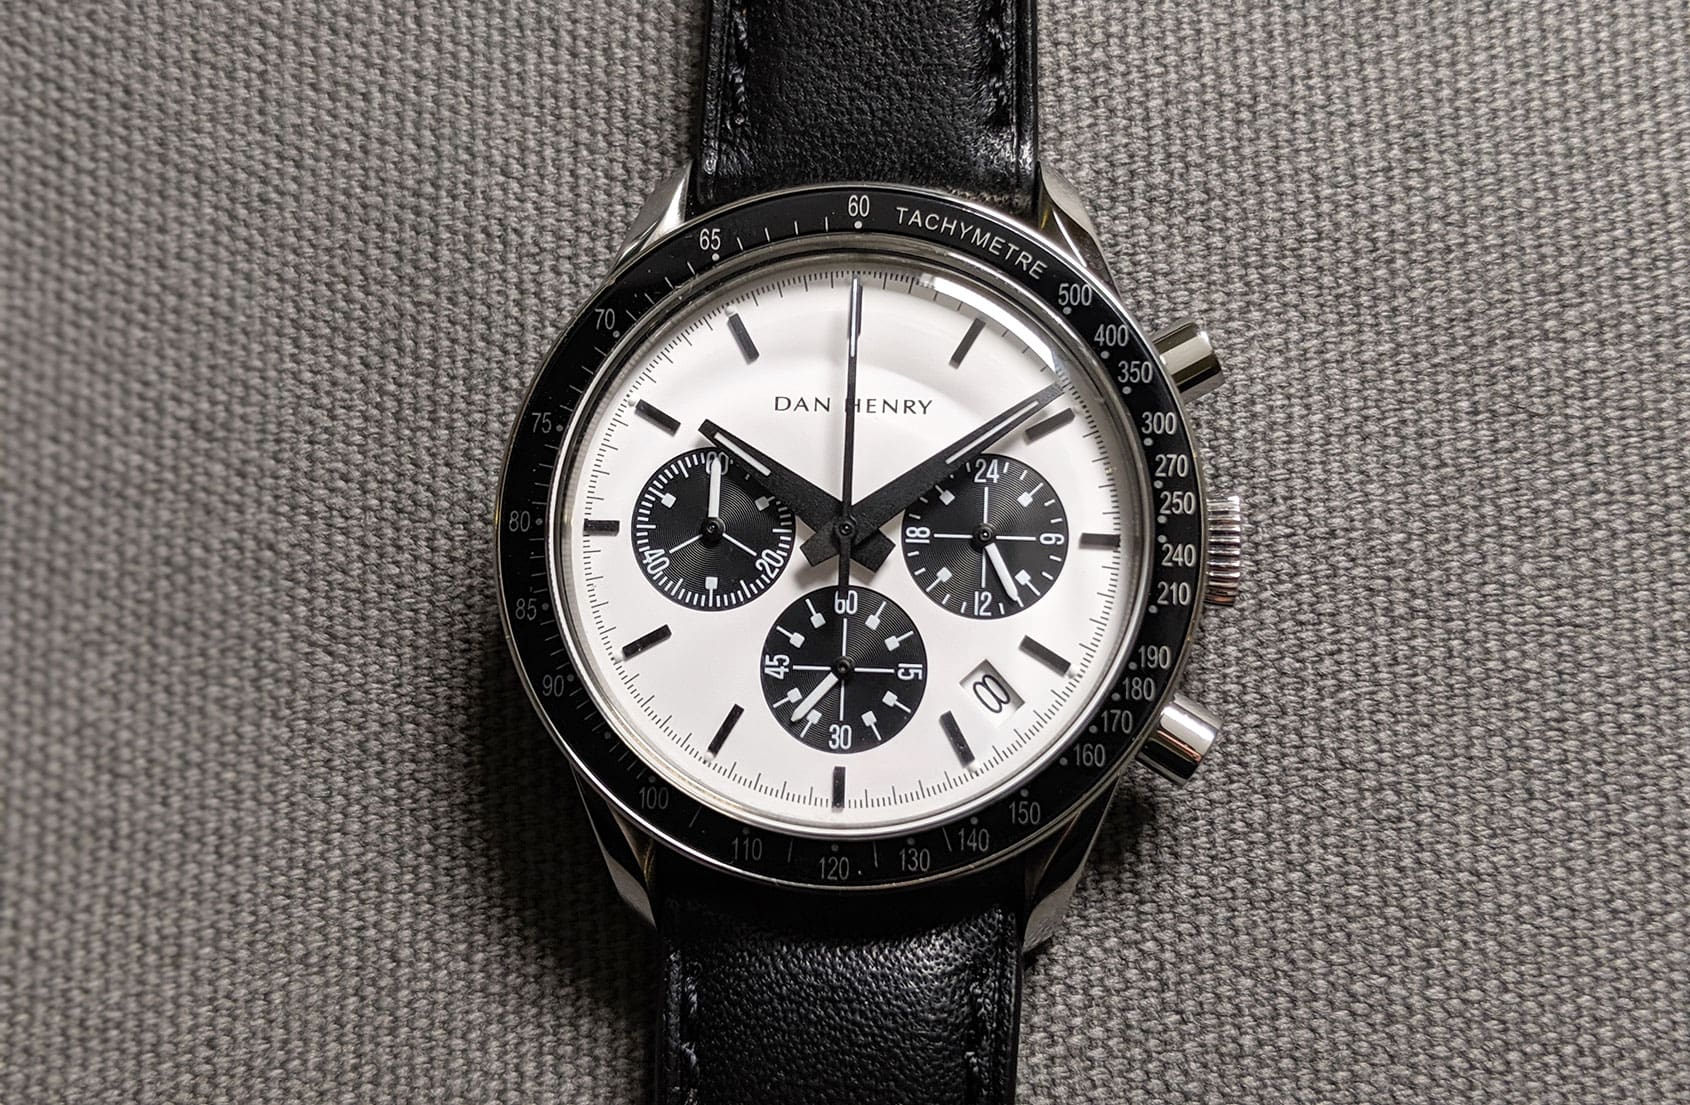 HANDS-ON: The Dan Henry 1962 Racing Chronograph is perfectly pitched (and priced) nostalgia